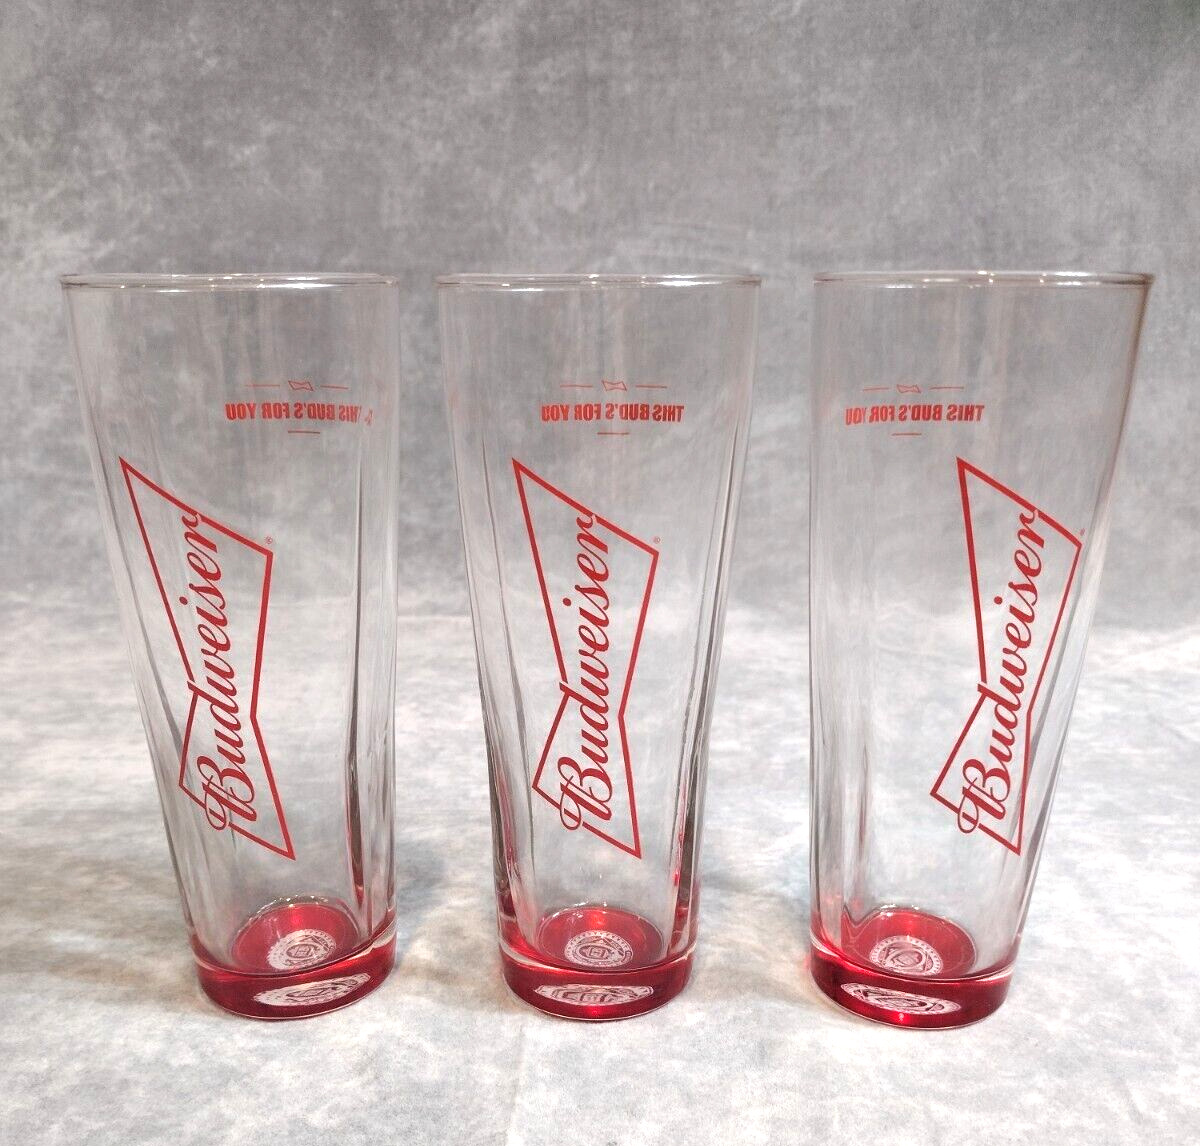 Budweiser, Signature, Pint Glass, 16 oz, Red Glow Bottom, Collectors, Set Of 3